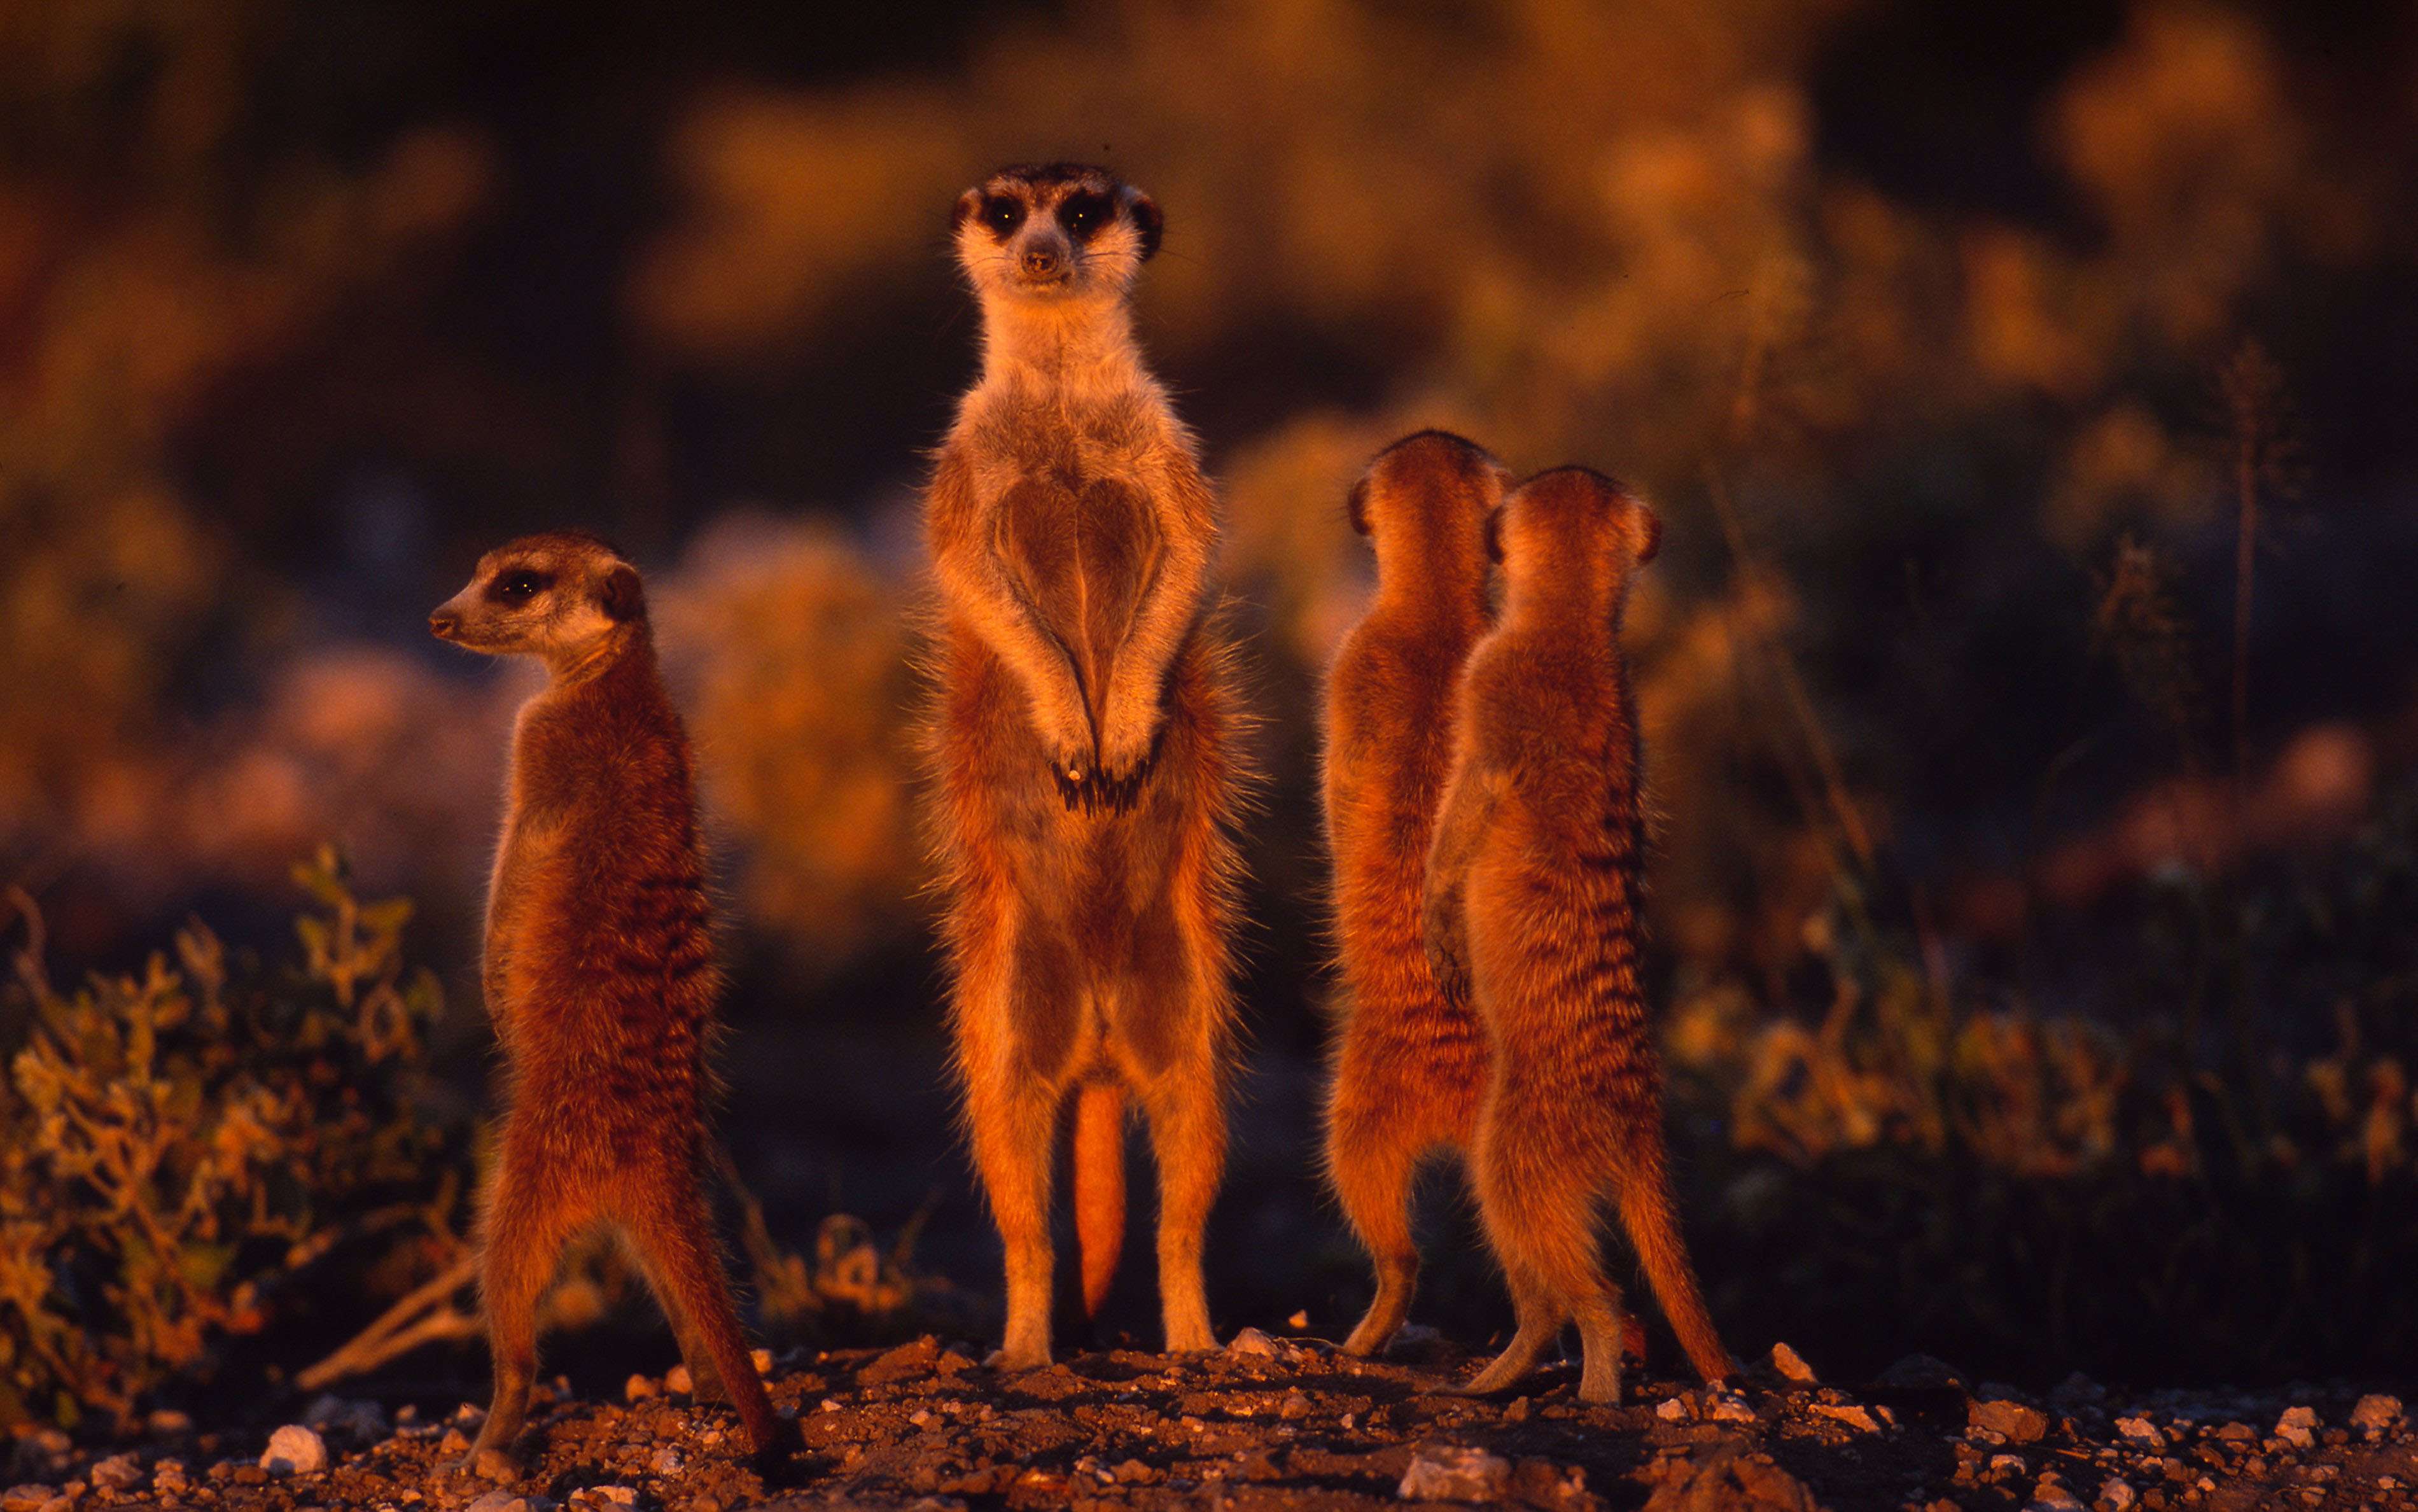 Meerkats standing upright to gain wider view of area Arid western areas of Southern Africa. © Martin Harvey/WWF-Canon